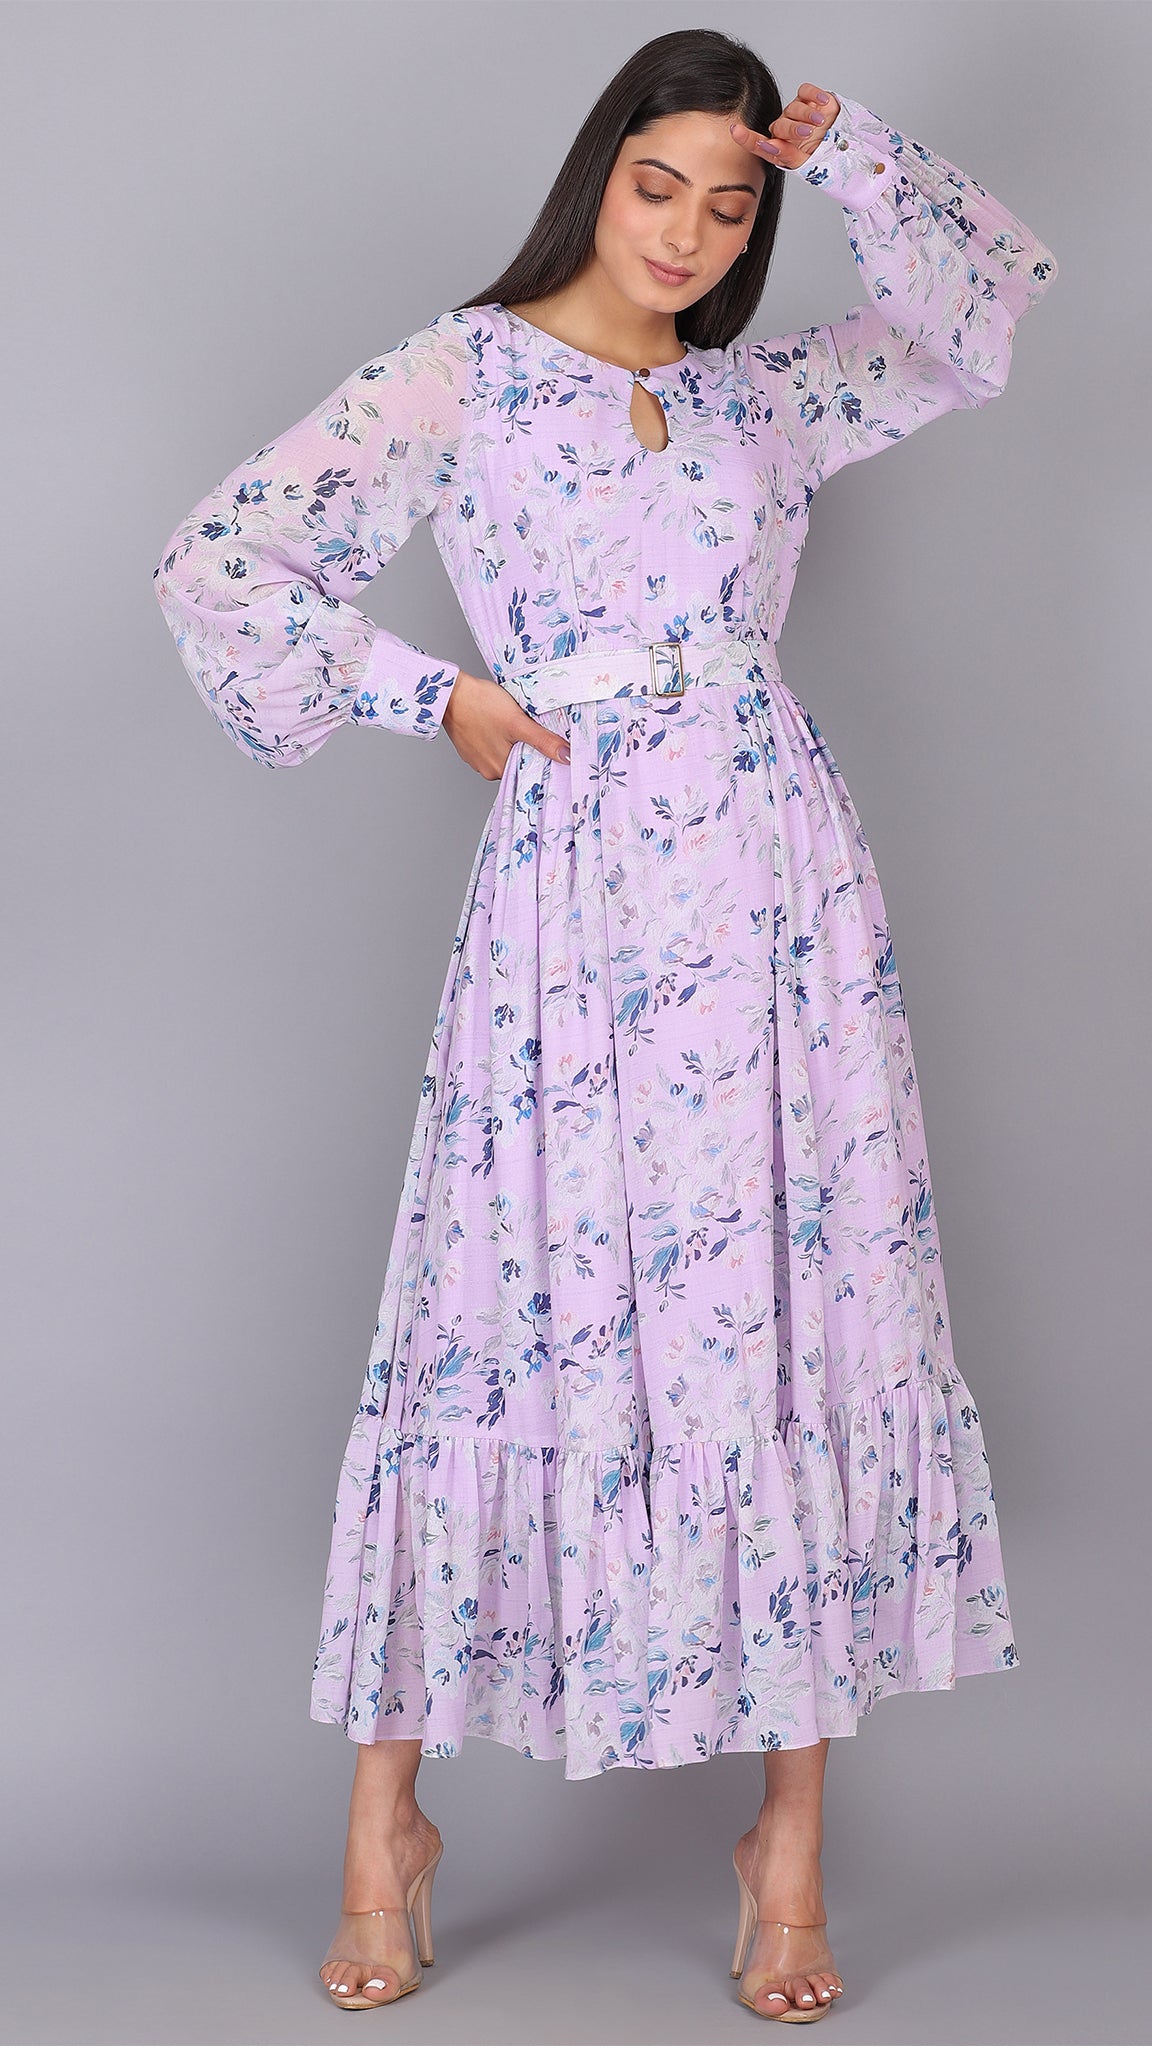 Full Sleeve Gowns Online Shopping for Women at Low Prices